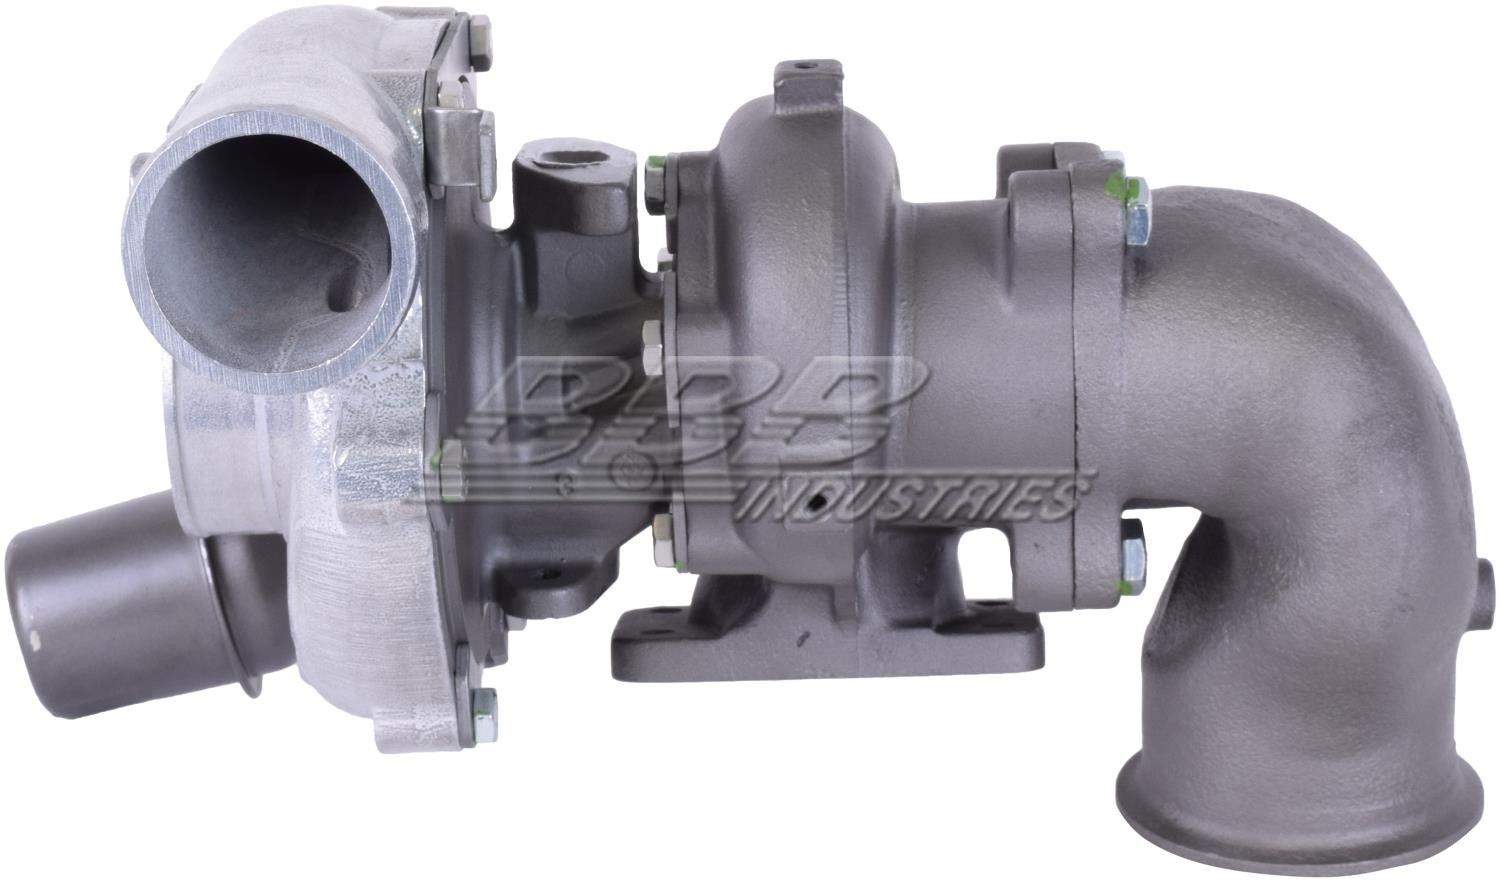 OE-TurboPower Remanufactured Turbocharger  top view frsport D3013